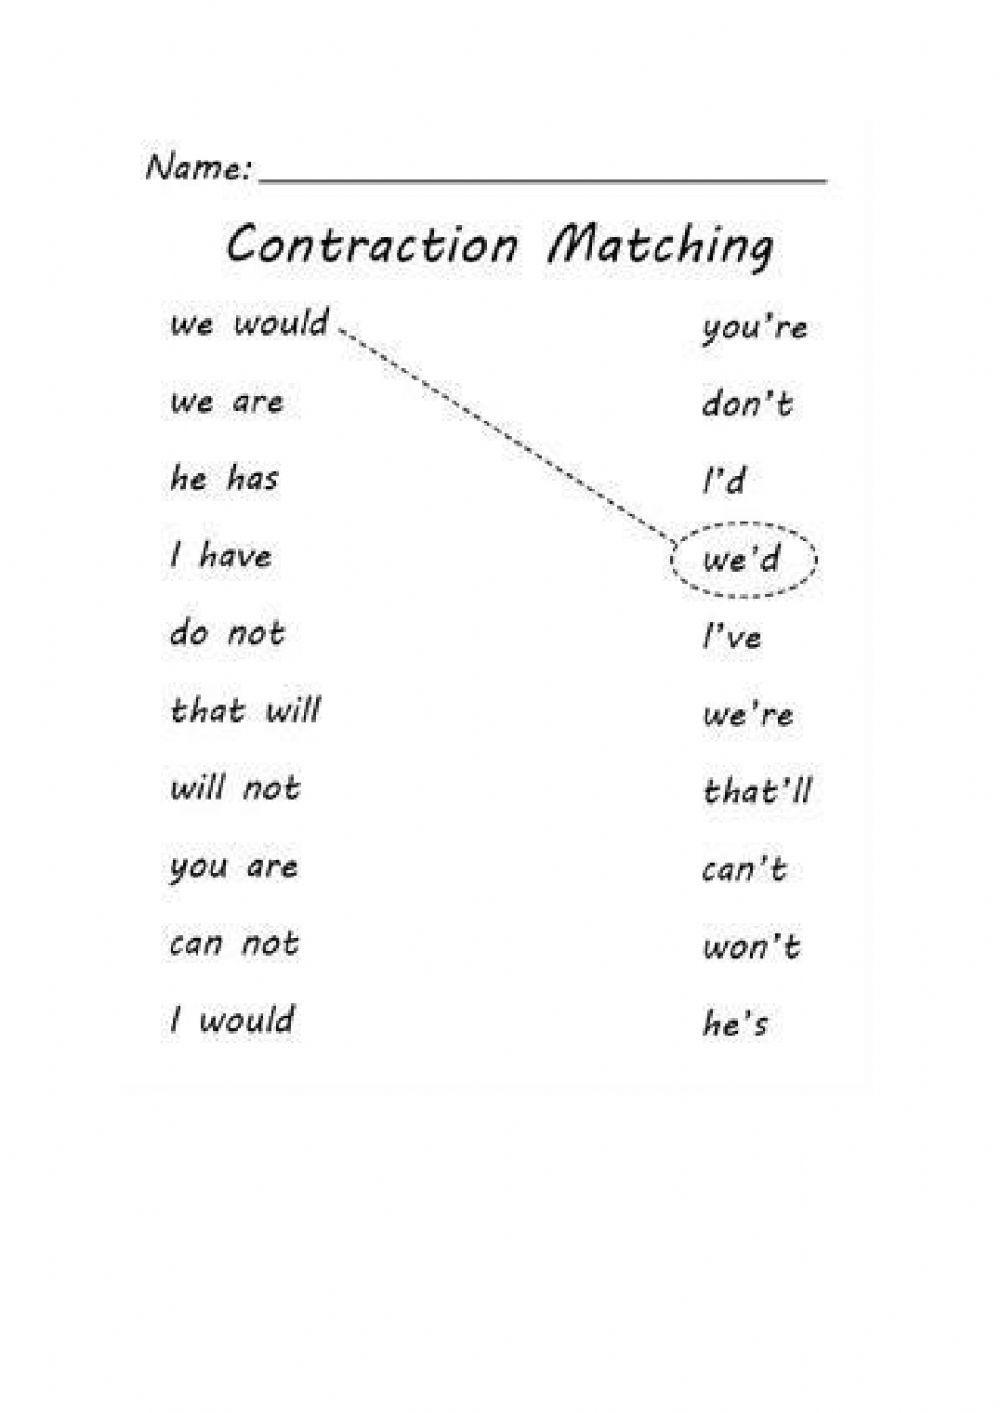 Contraction Matching